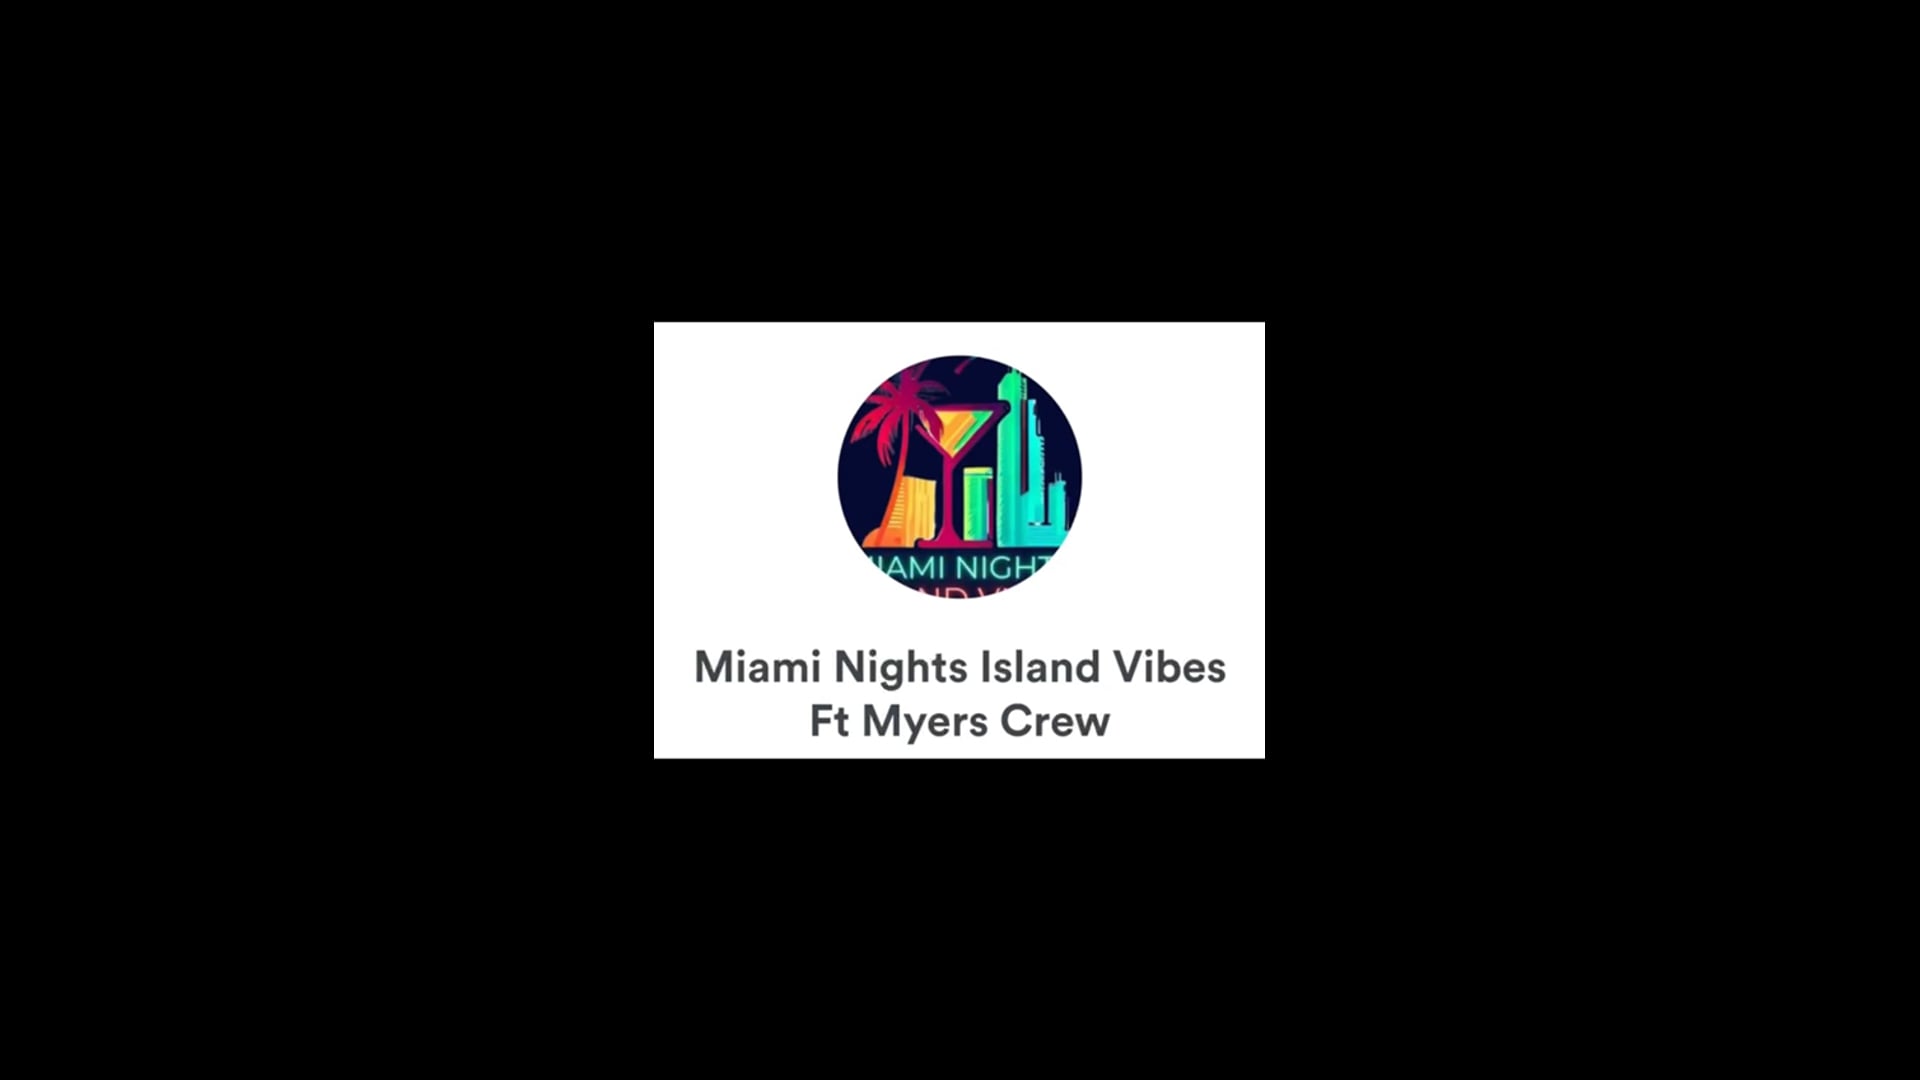 Promotional video thumbnail 1 for Miami Nights Island Vibes Ft Myers Crew